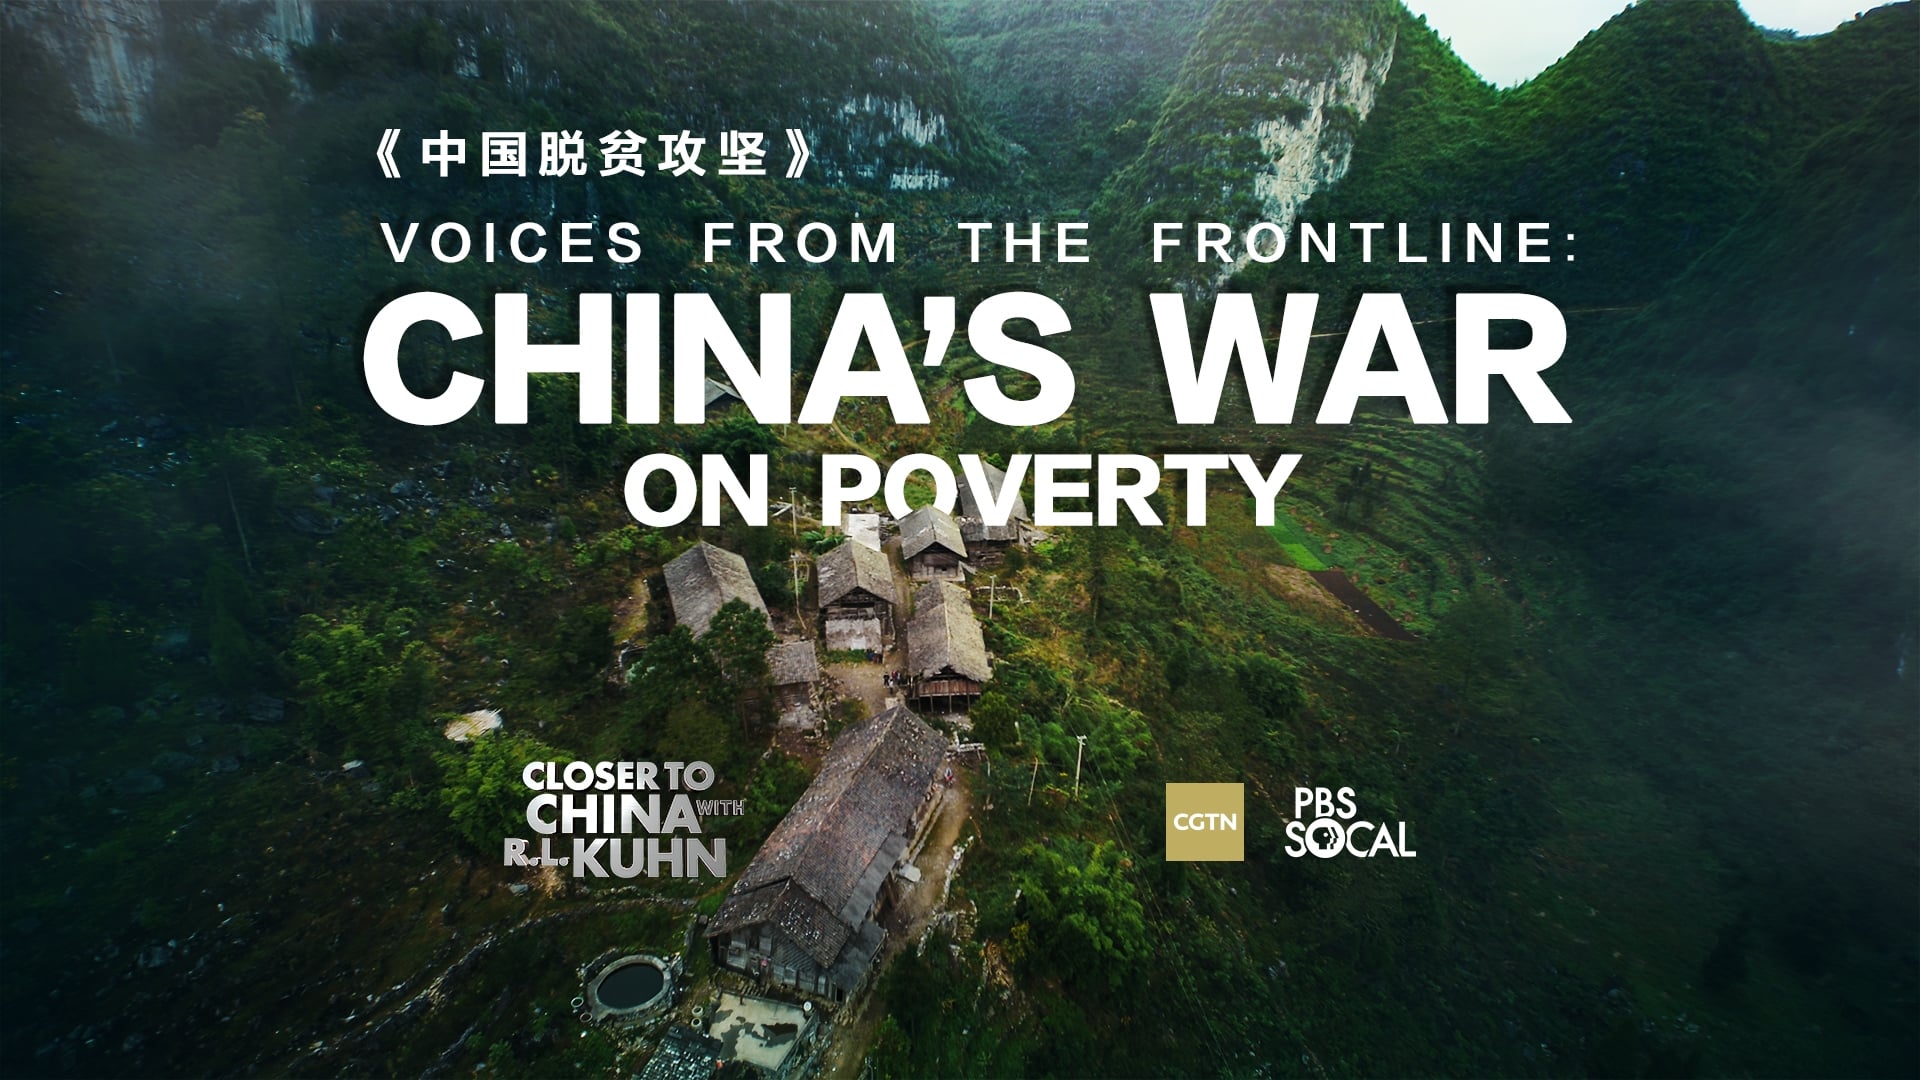 Voices from the Frontline: China's War on Poverty